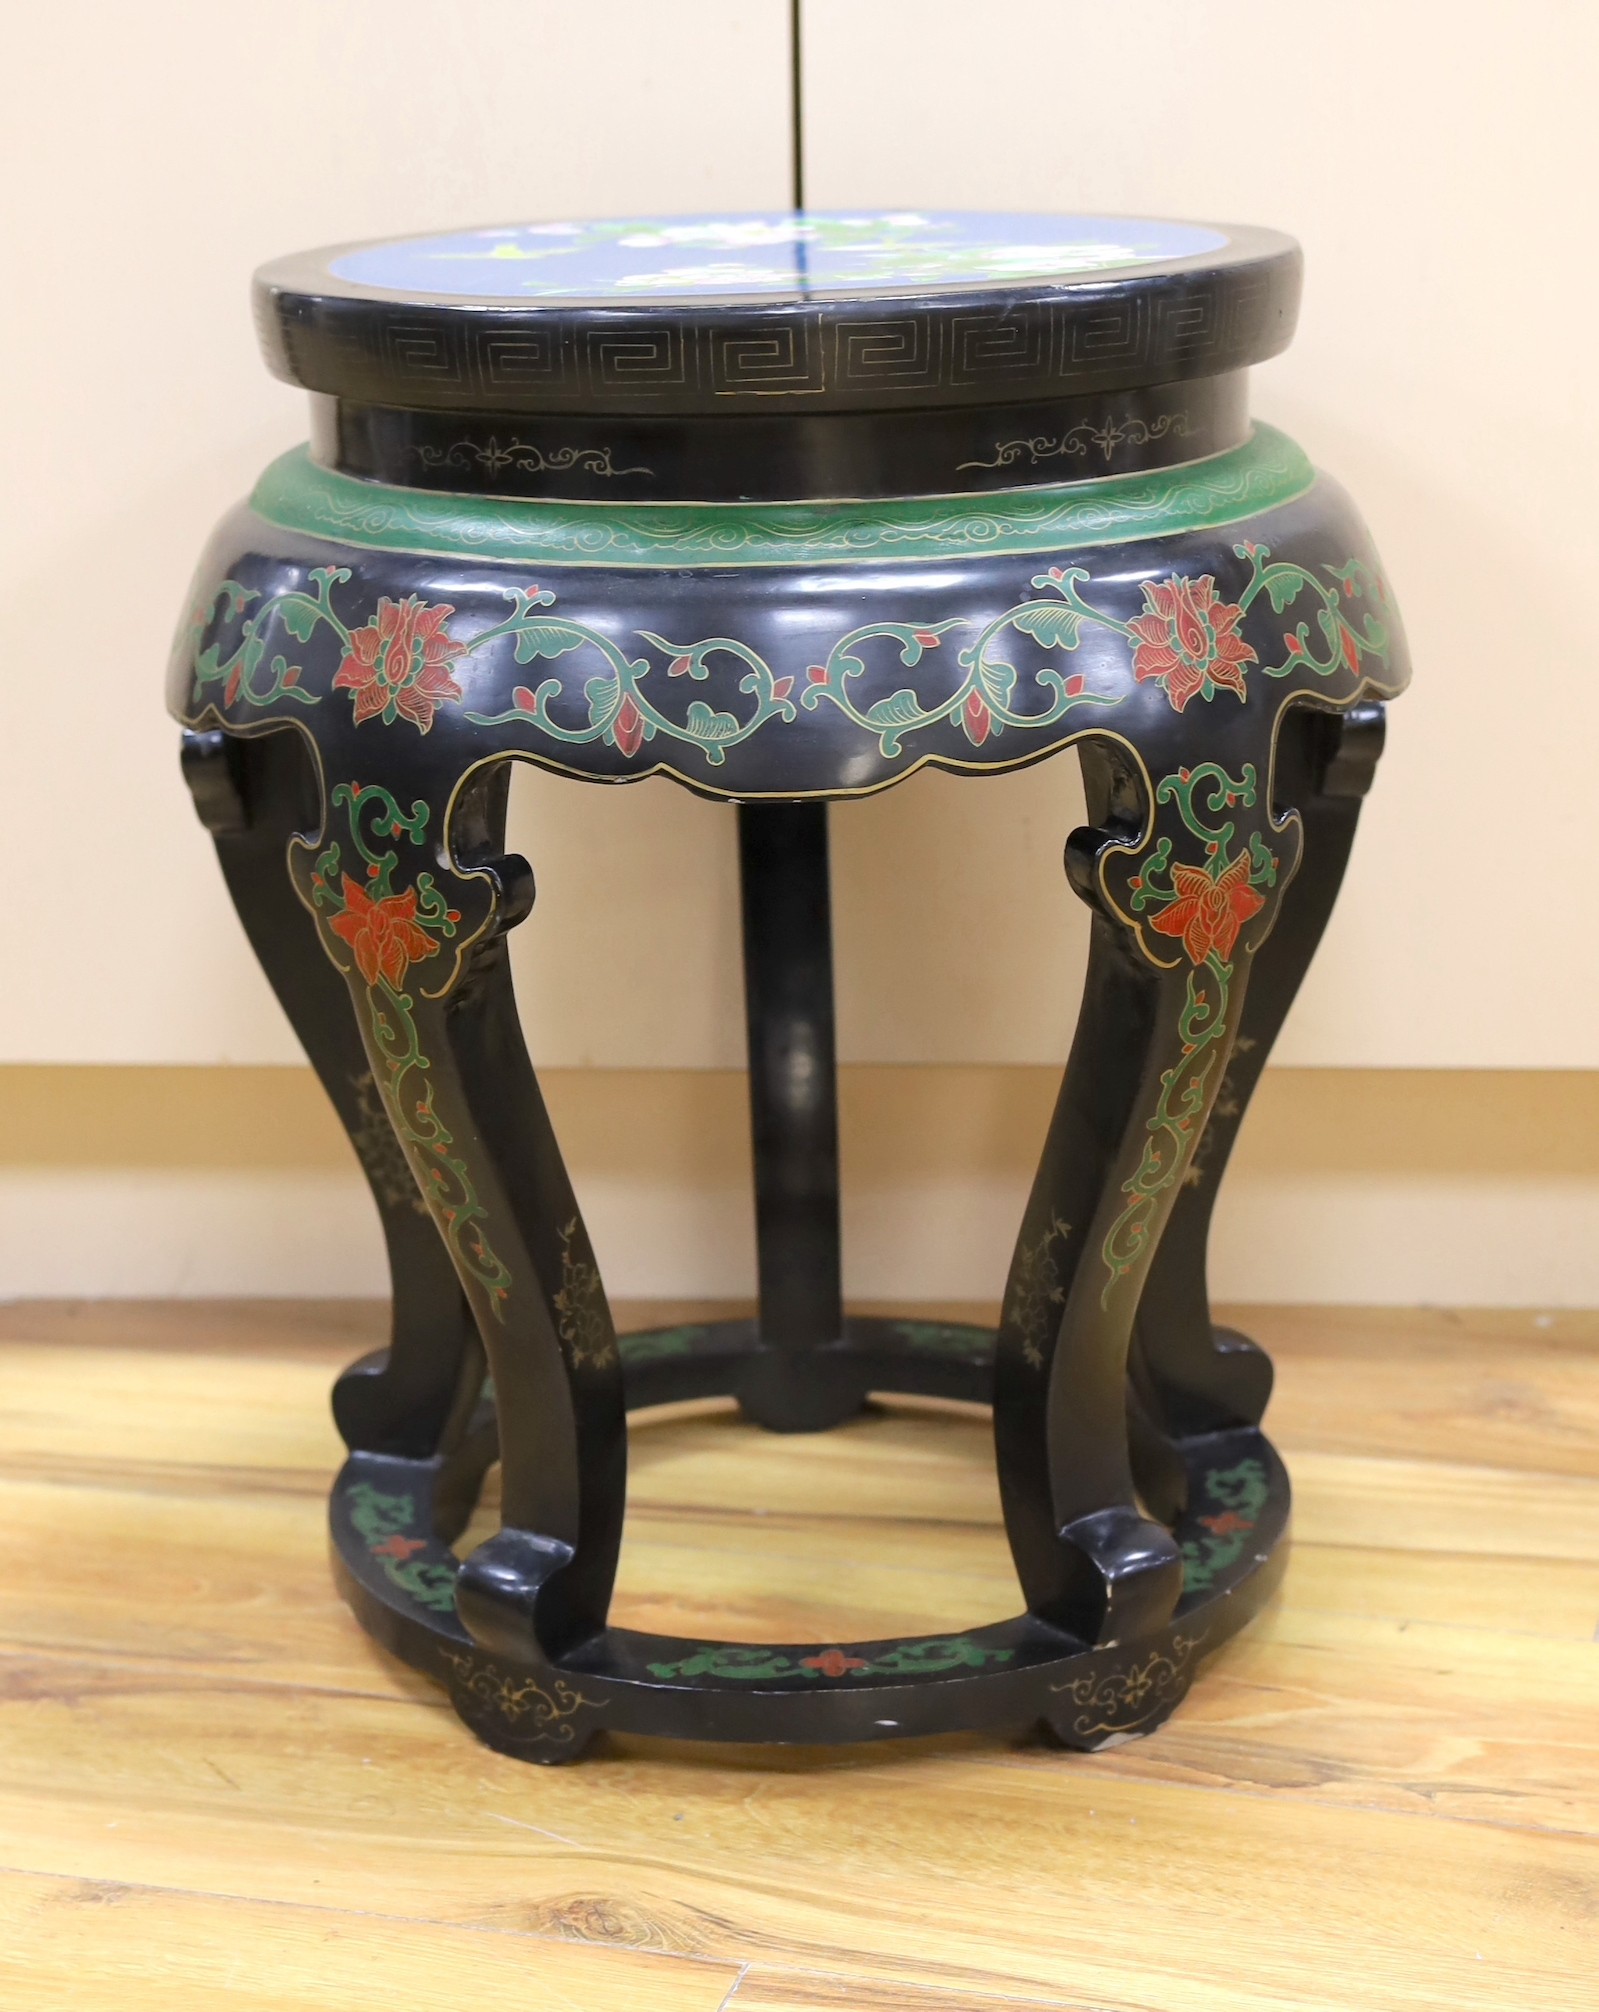 A Chinese lacquer and cloisonné enamel mounted stand, 54cm tall